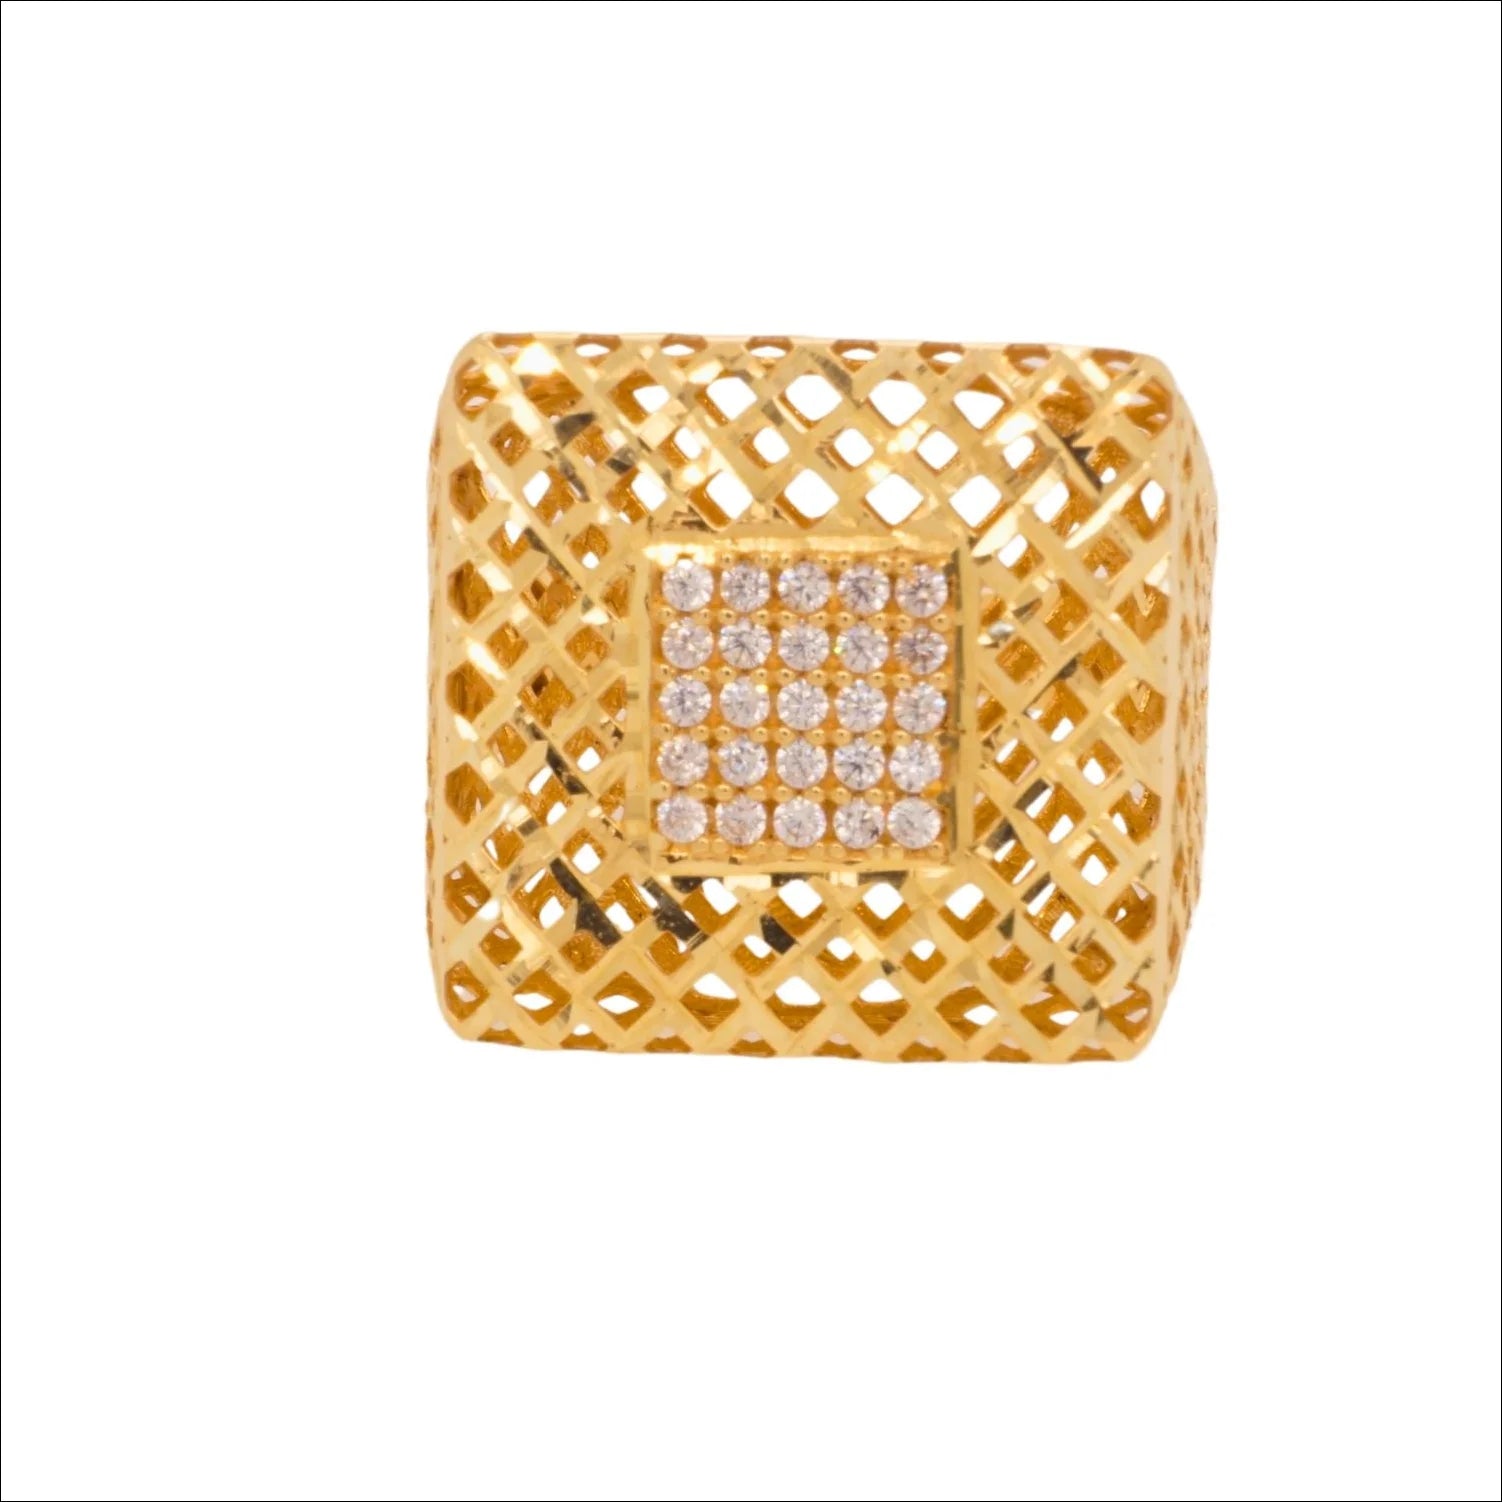 Radiance Redefined: The 18k Gold Ring Adorned with CZ